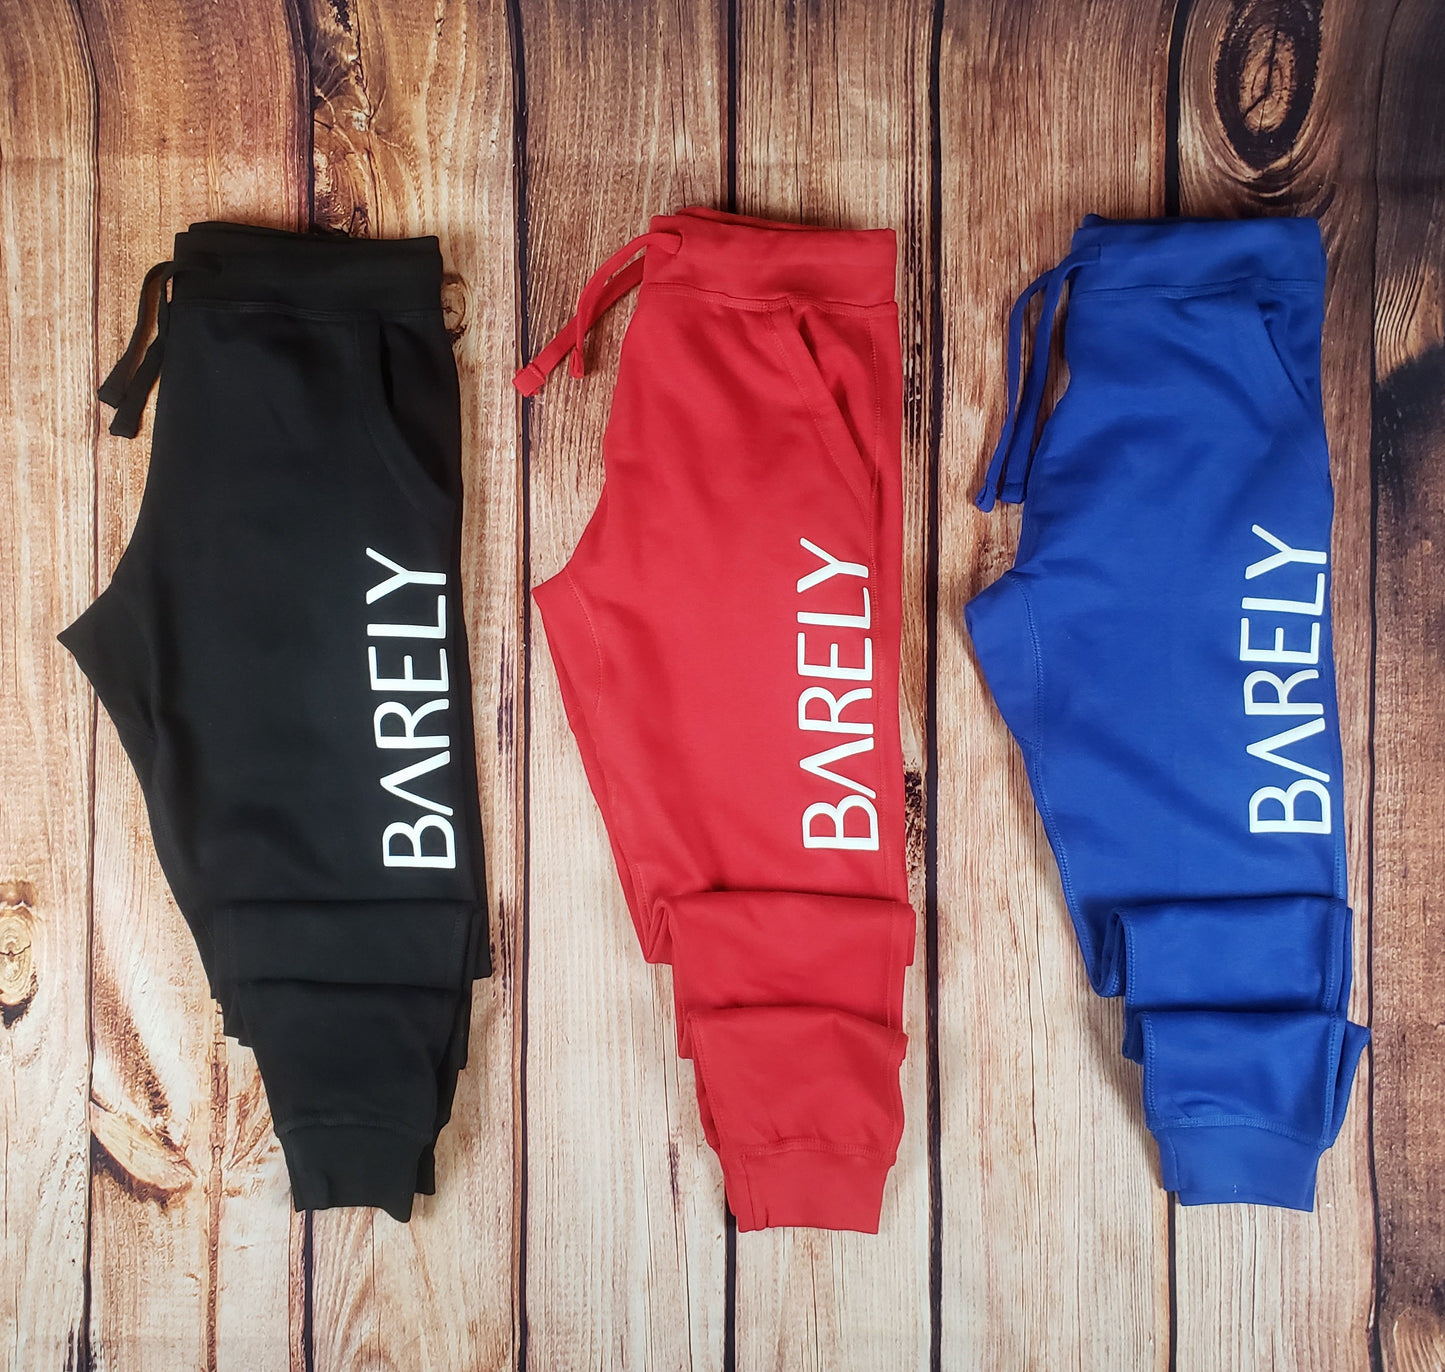 Barely Puff Logo Joggers (Blu/Wht) - Barely Ordinary